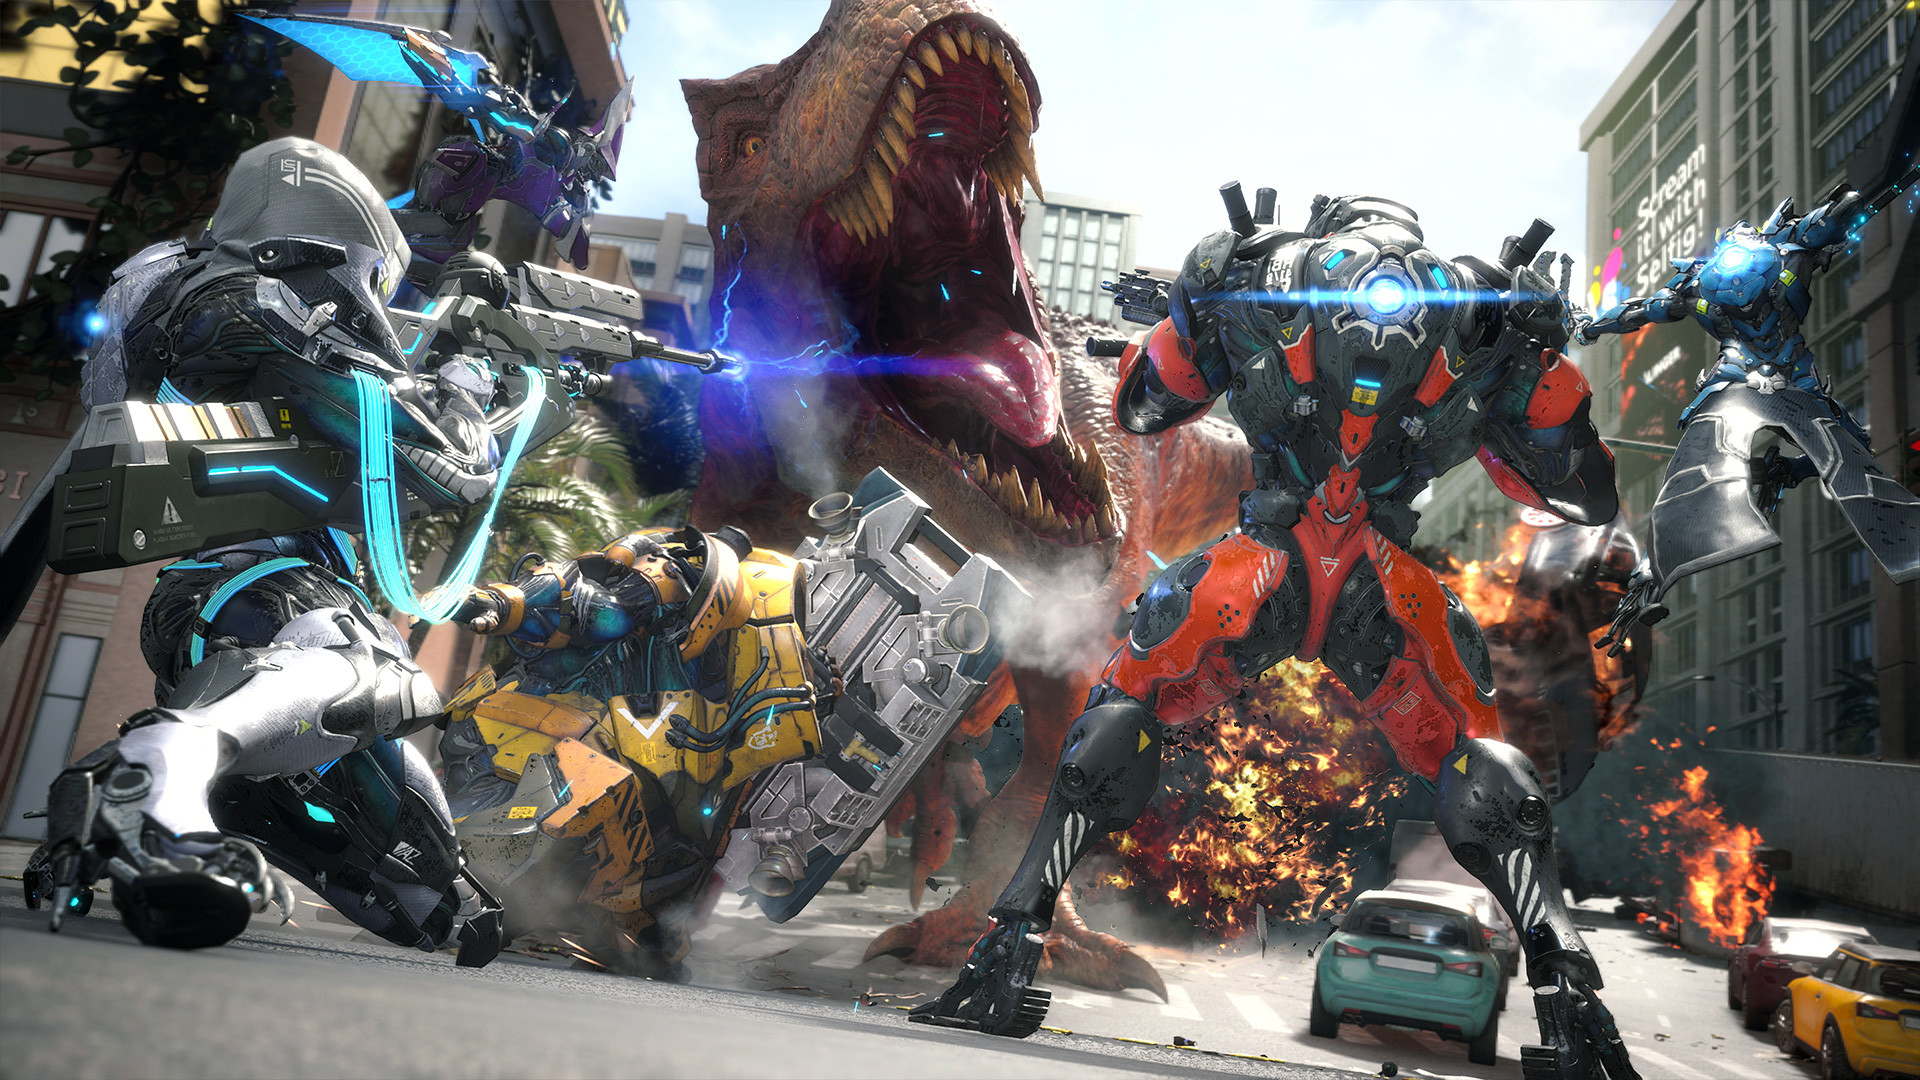 Dino-killing action game Exoprimal gets extended 15-minute block of gameplay